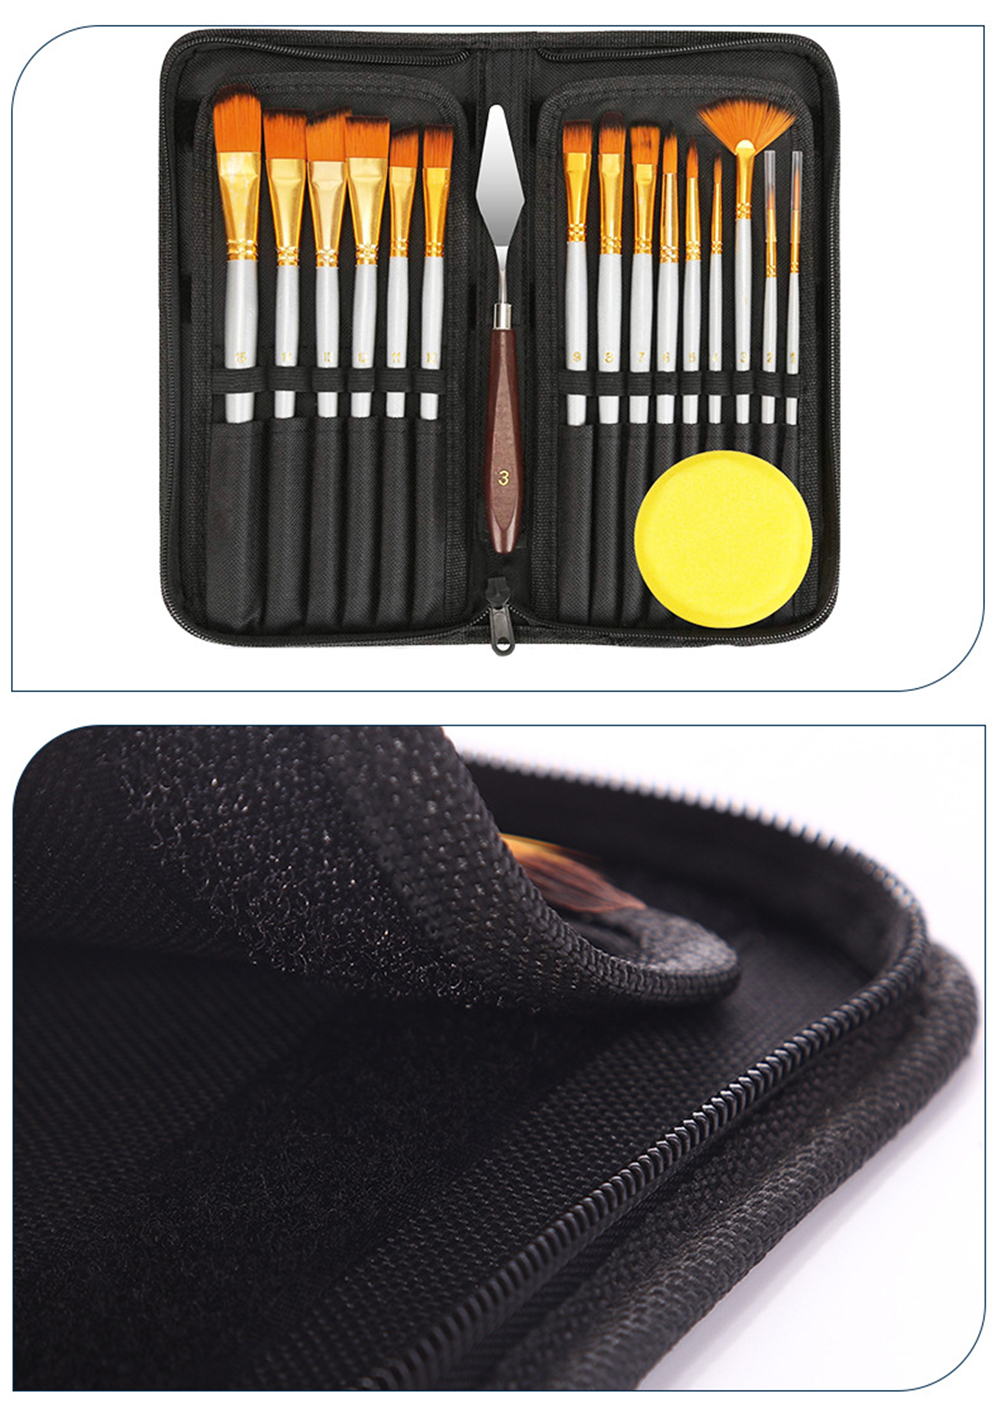 17Pcs-Paint-Brush-Set-Includes-Pop-up-Carrying-Case-with-Palette-Knife-and-1-Sponges-for-Acrylic-Oil-1763684-4